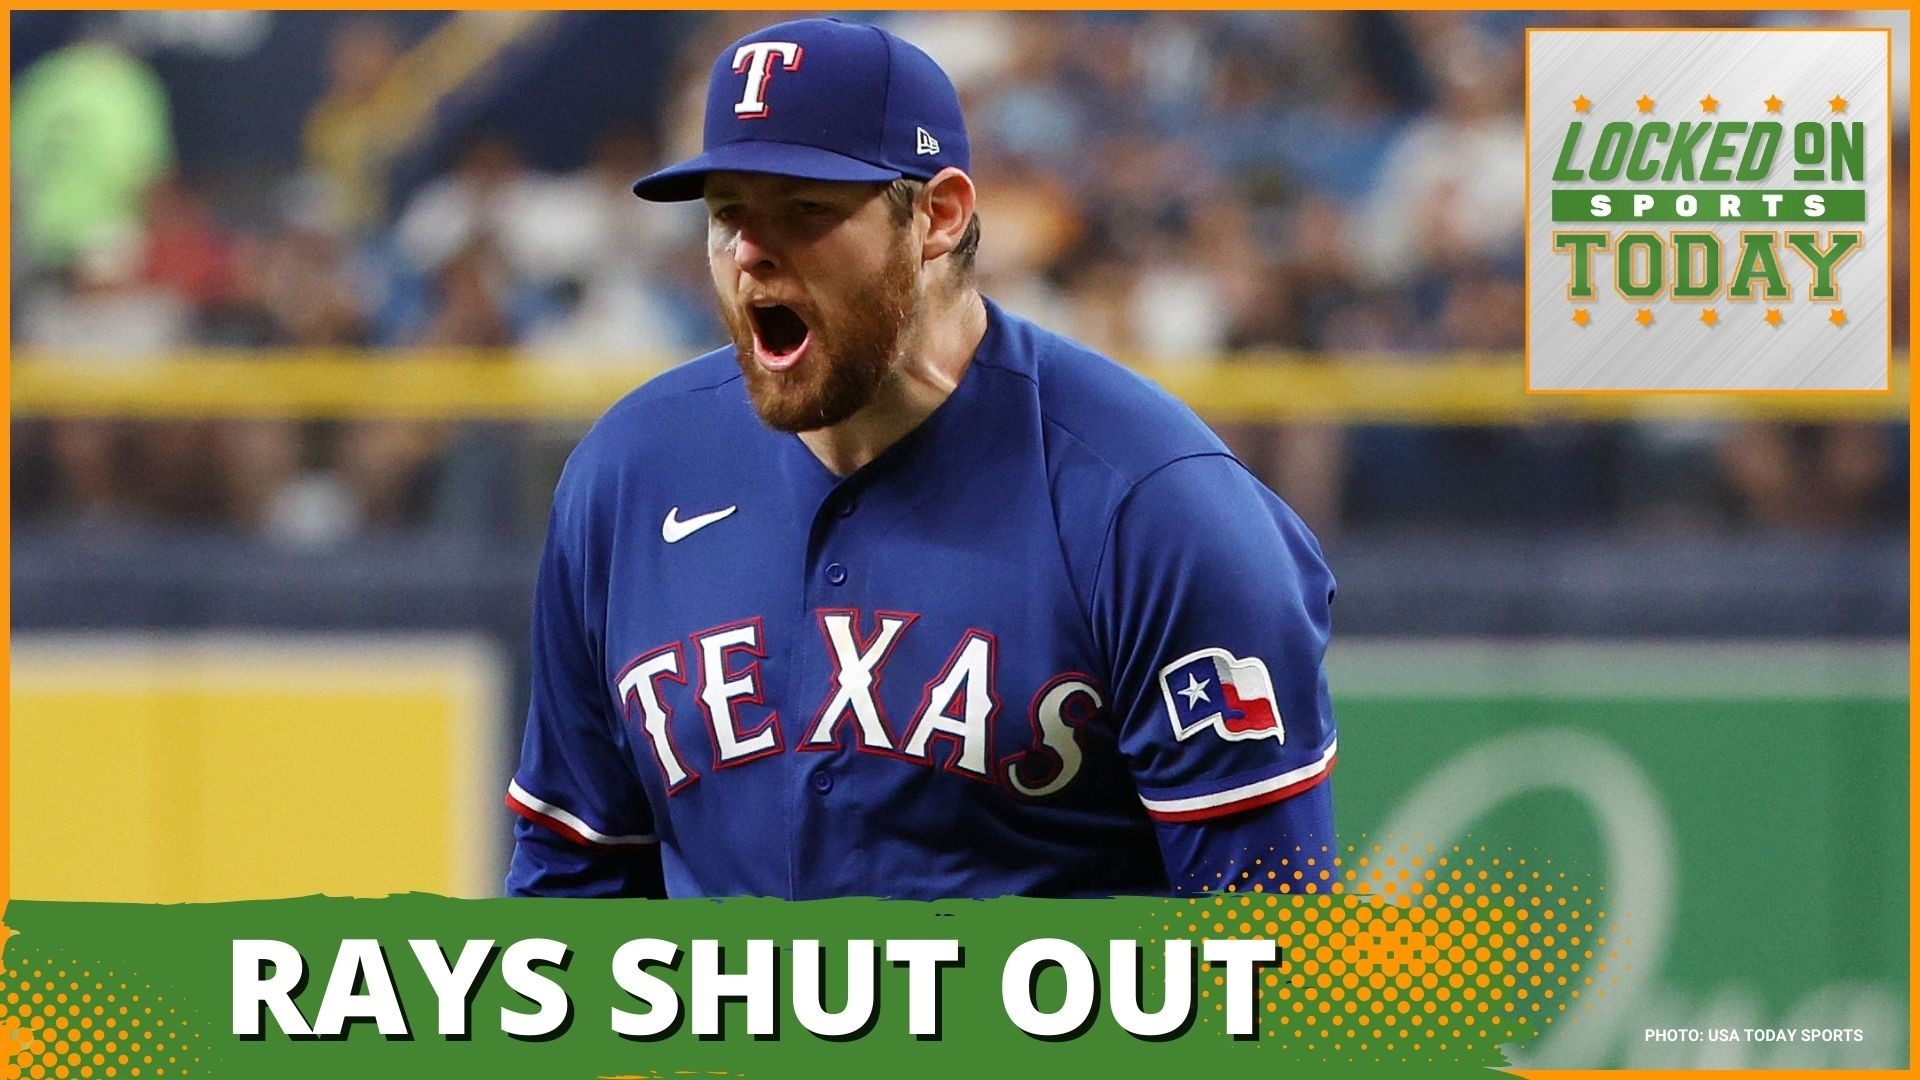 Discussing the day's top sports stories from the Texas Rangers take game 1 in their first game of the MLB postseason to two QBs under a microscope performed well.